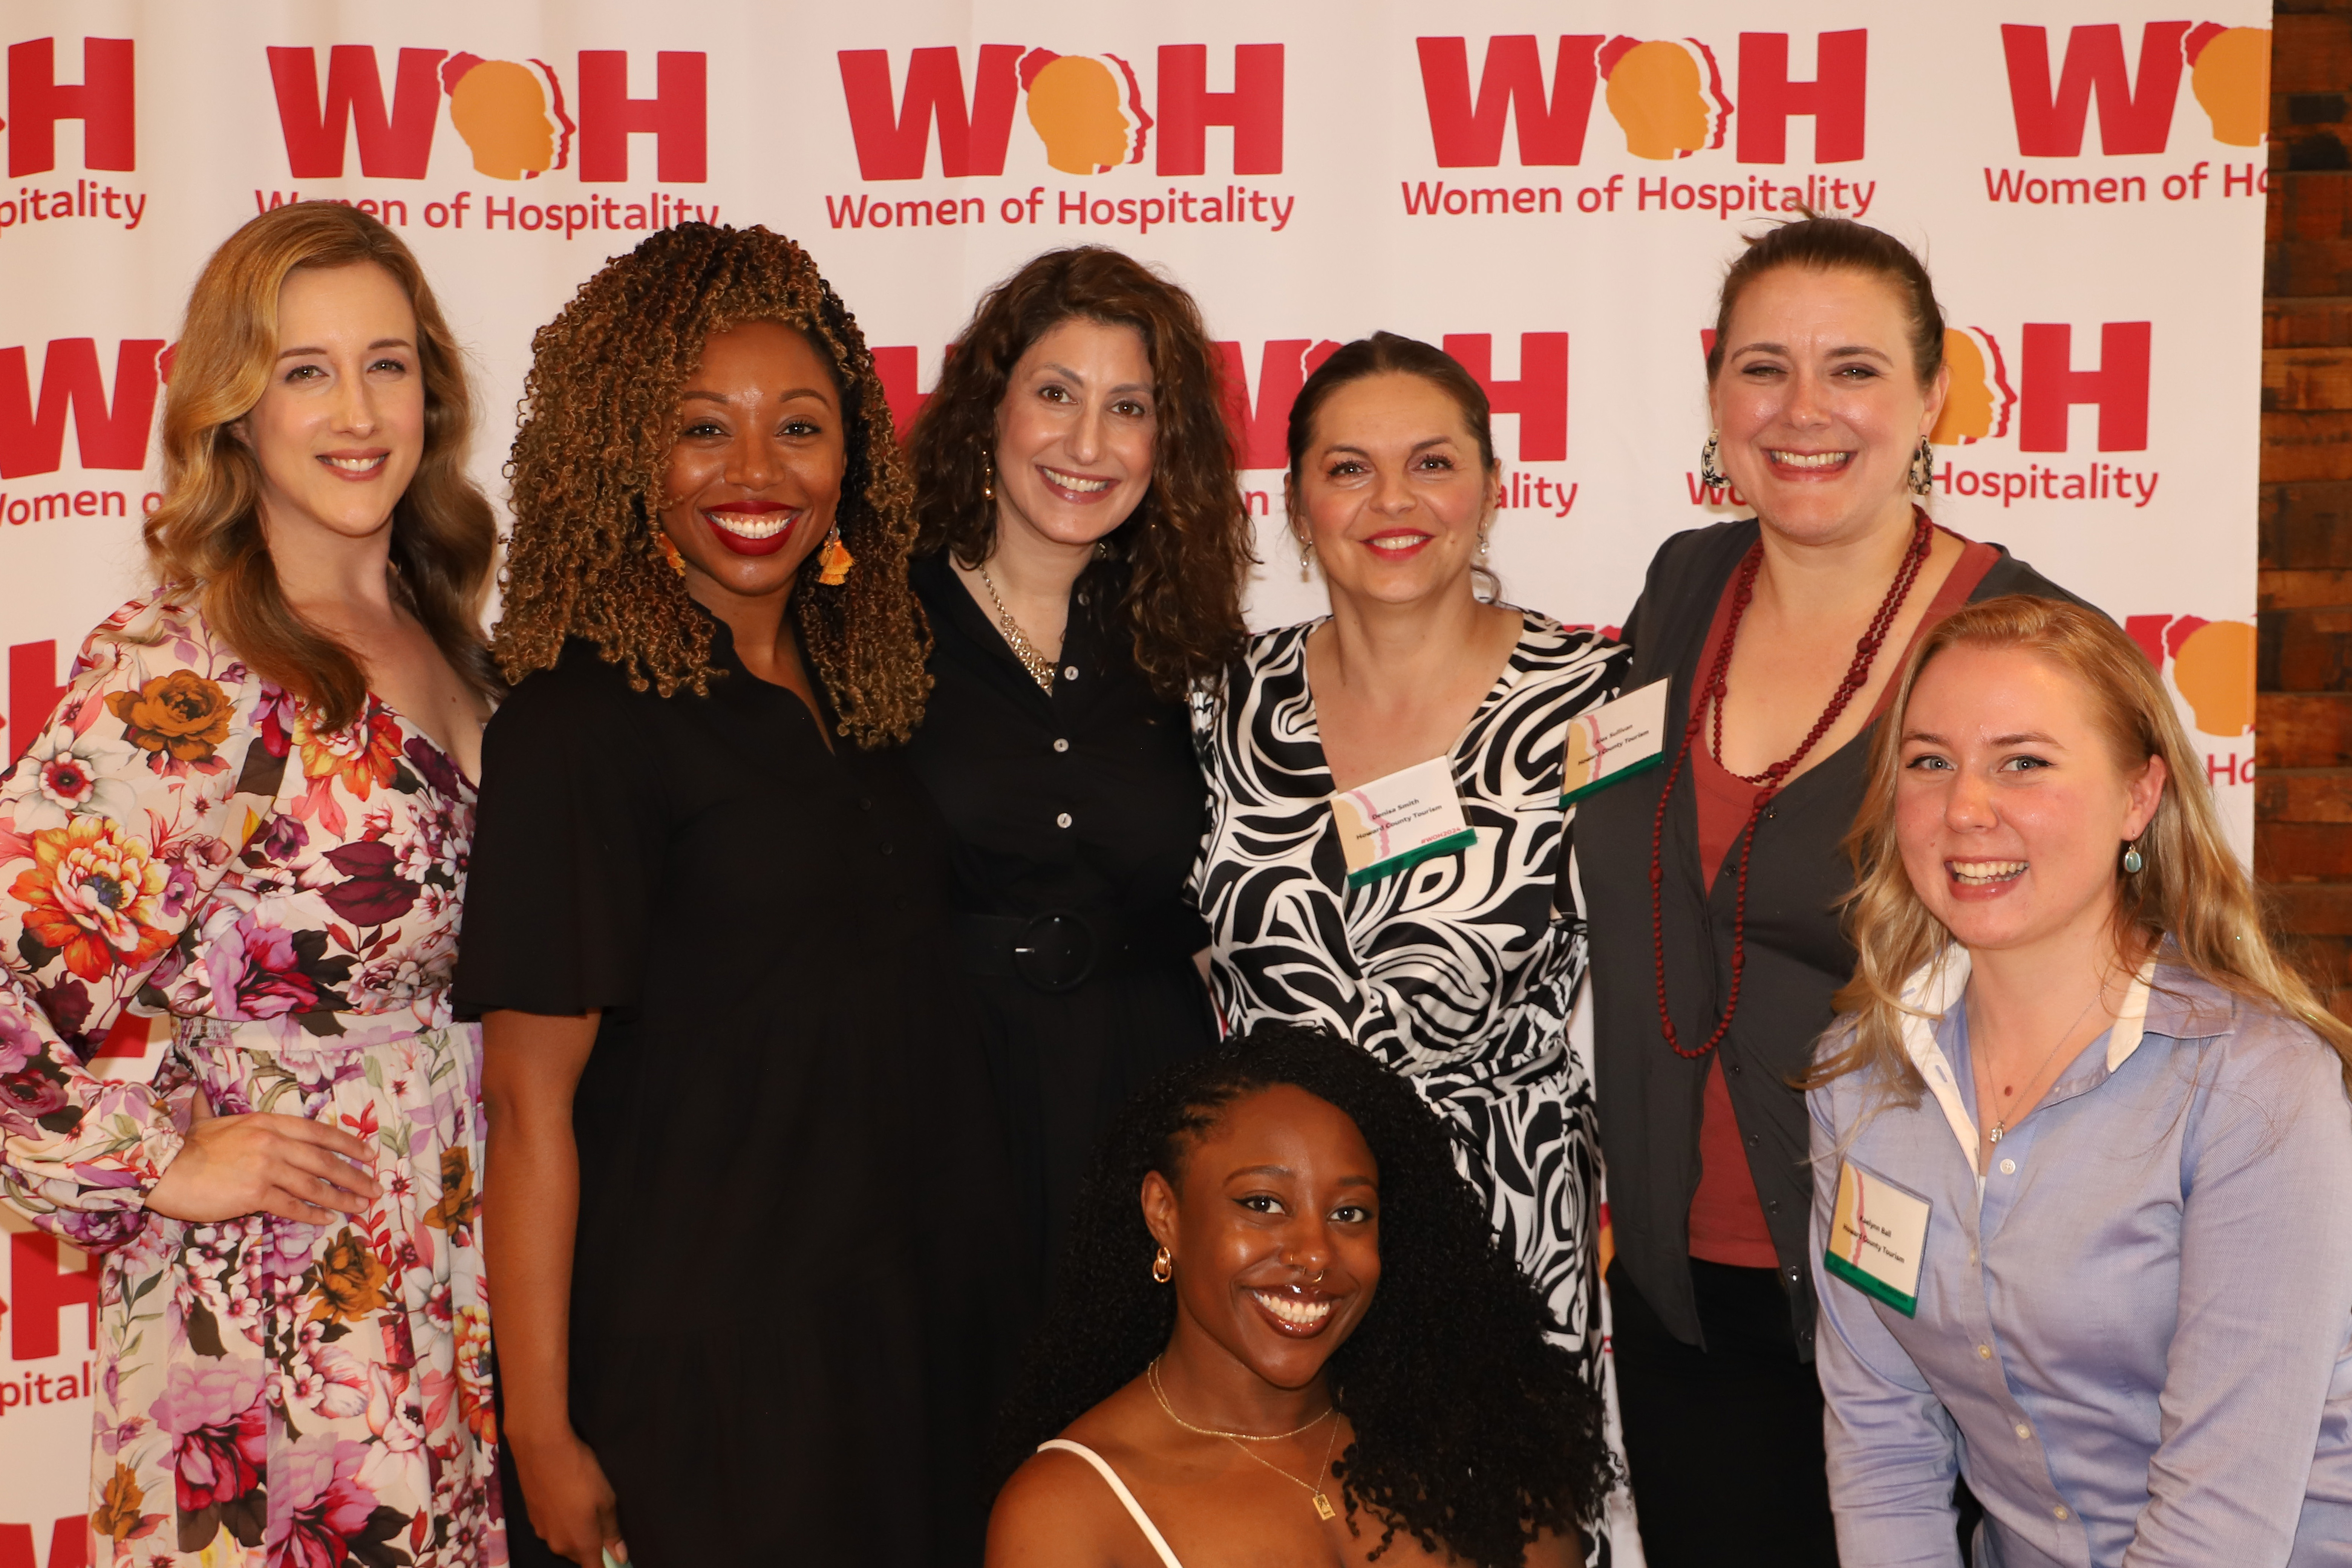 A group of women poste in front of the WoH backdrop